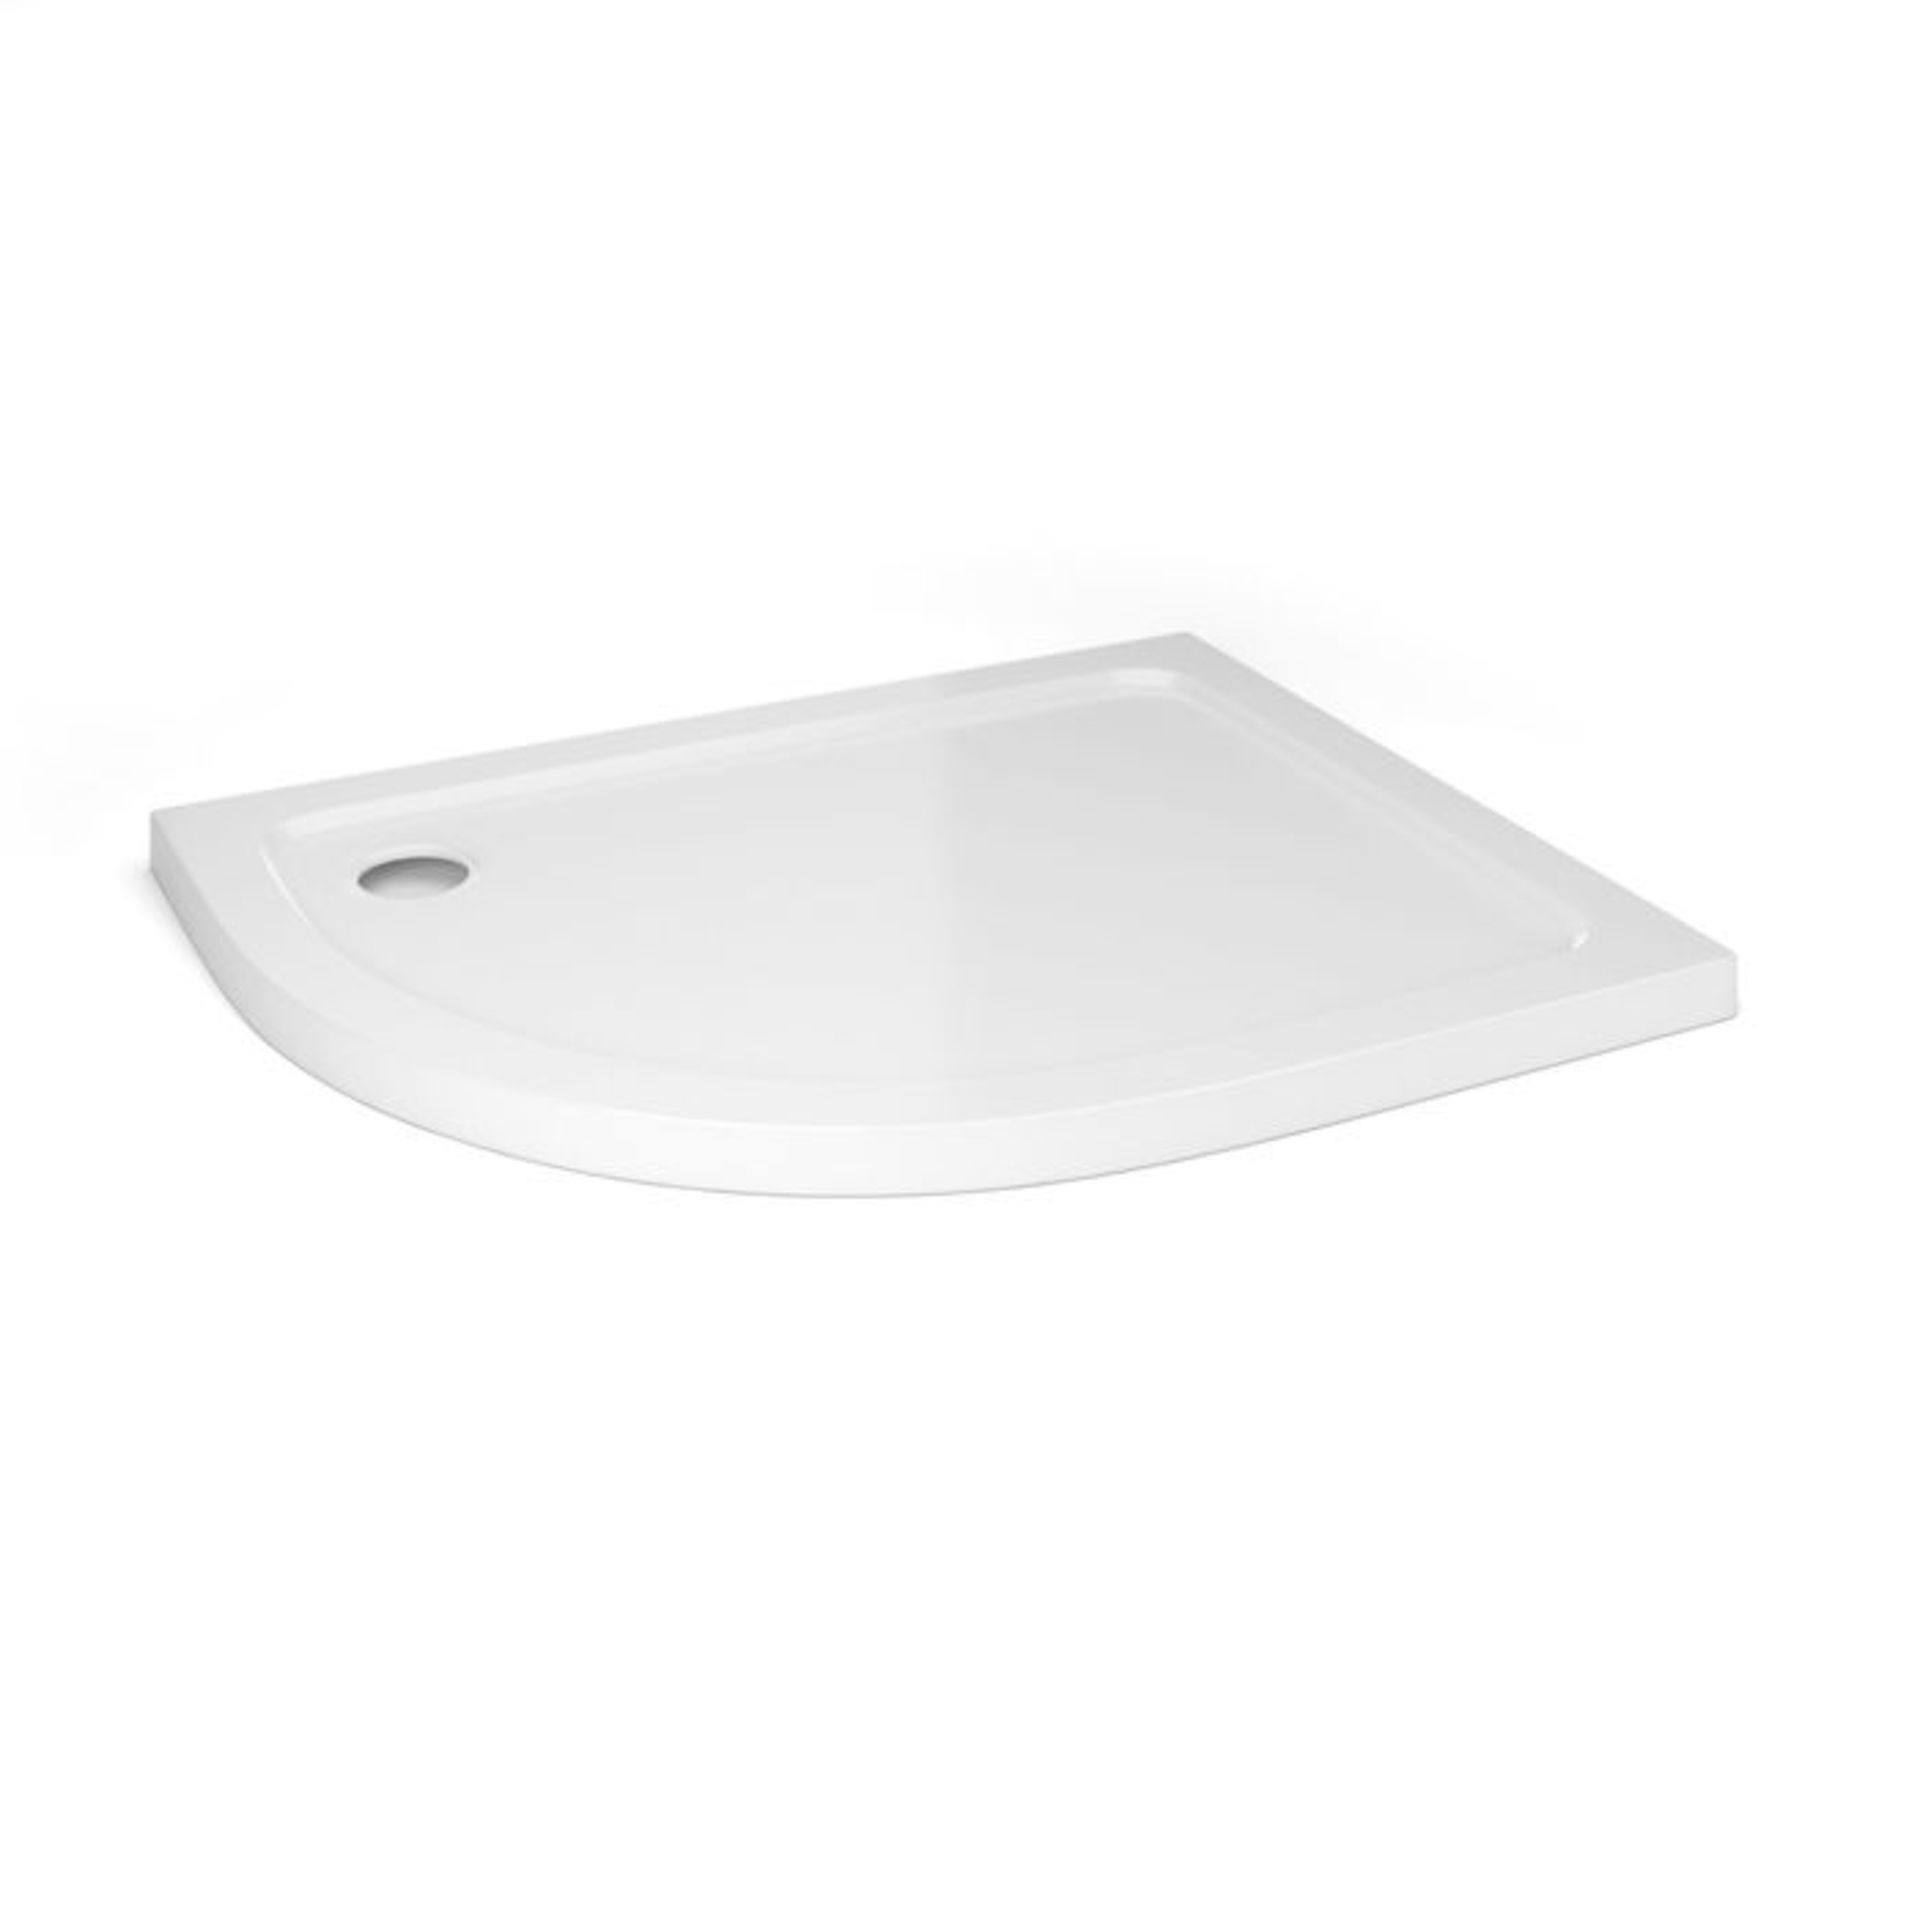 (MW196) 1000x800mm Offset Quadrant Ultra Slim Stone Shower Tray - Left. Constructed from acrylic - Image 2 of 2